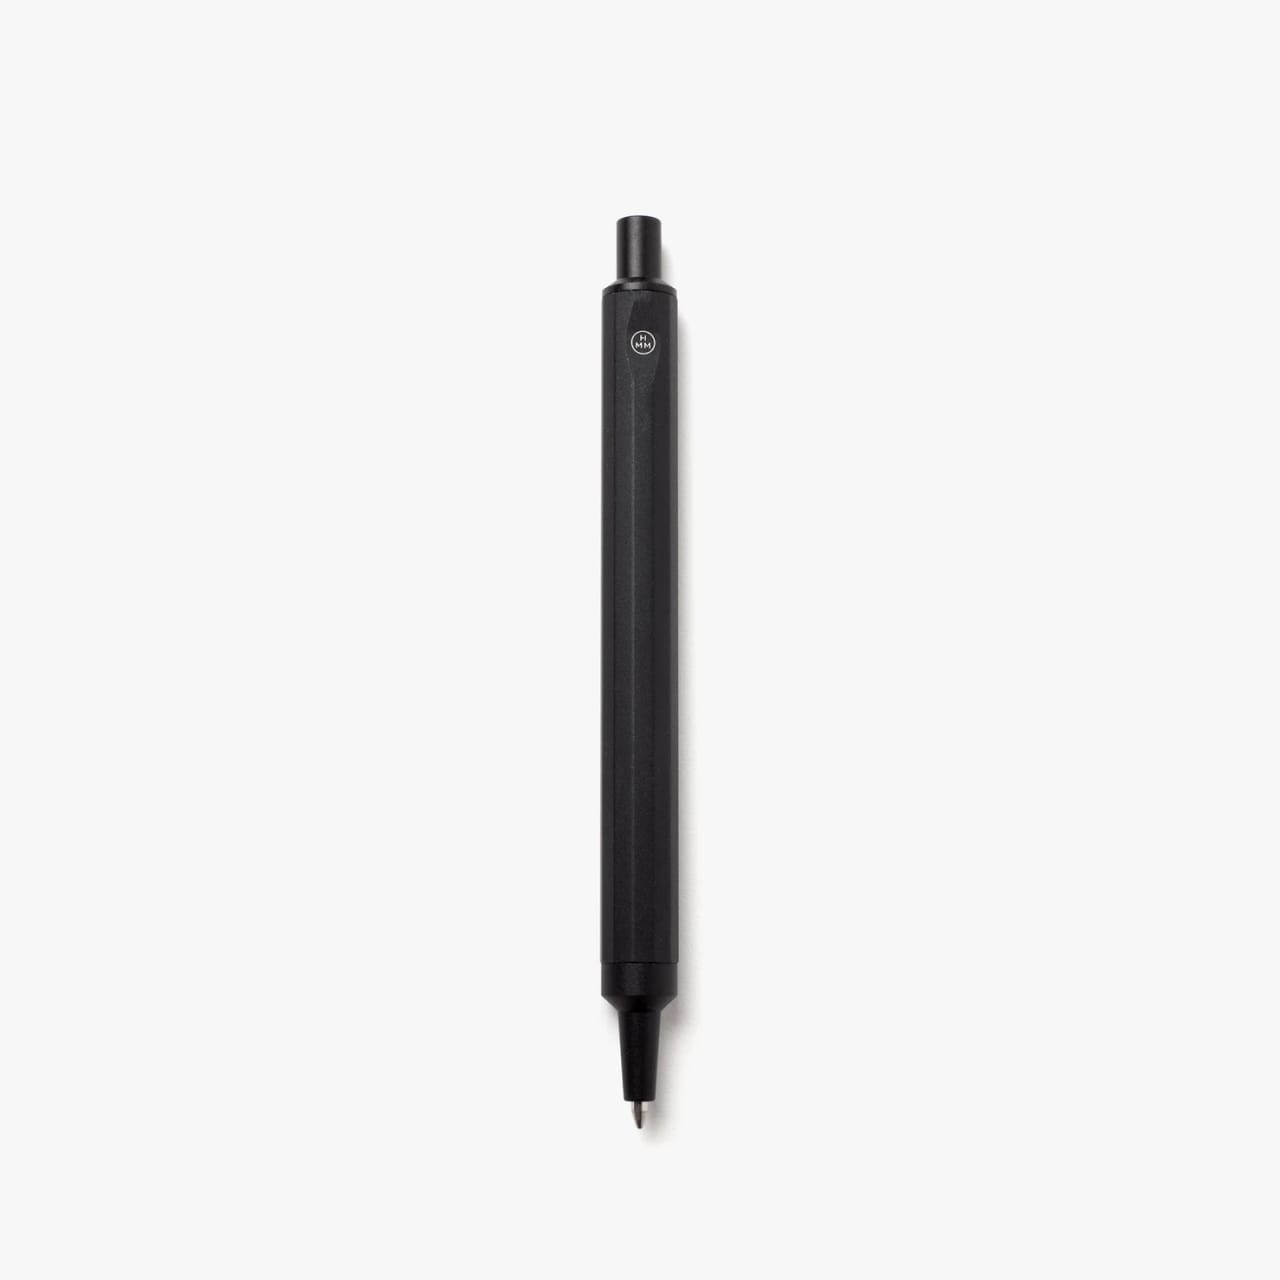 Black machined steel pen with hexagonal grip and small white logo at top.